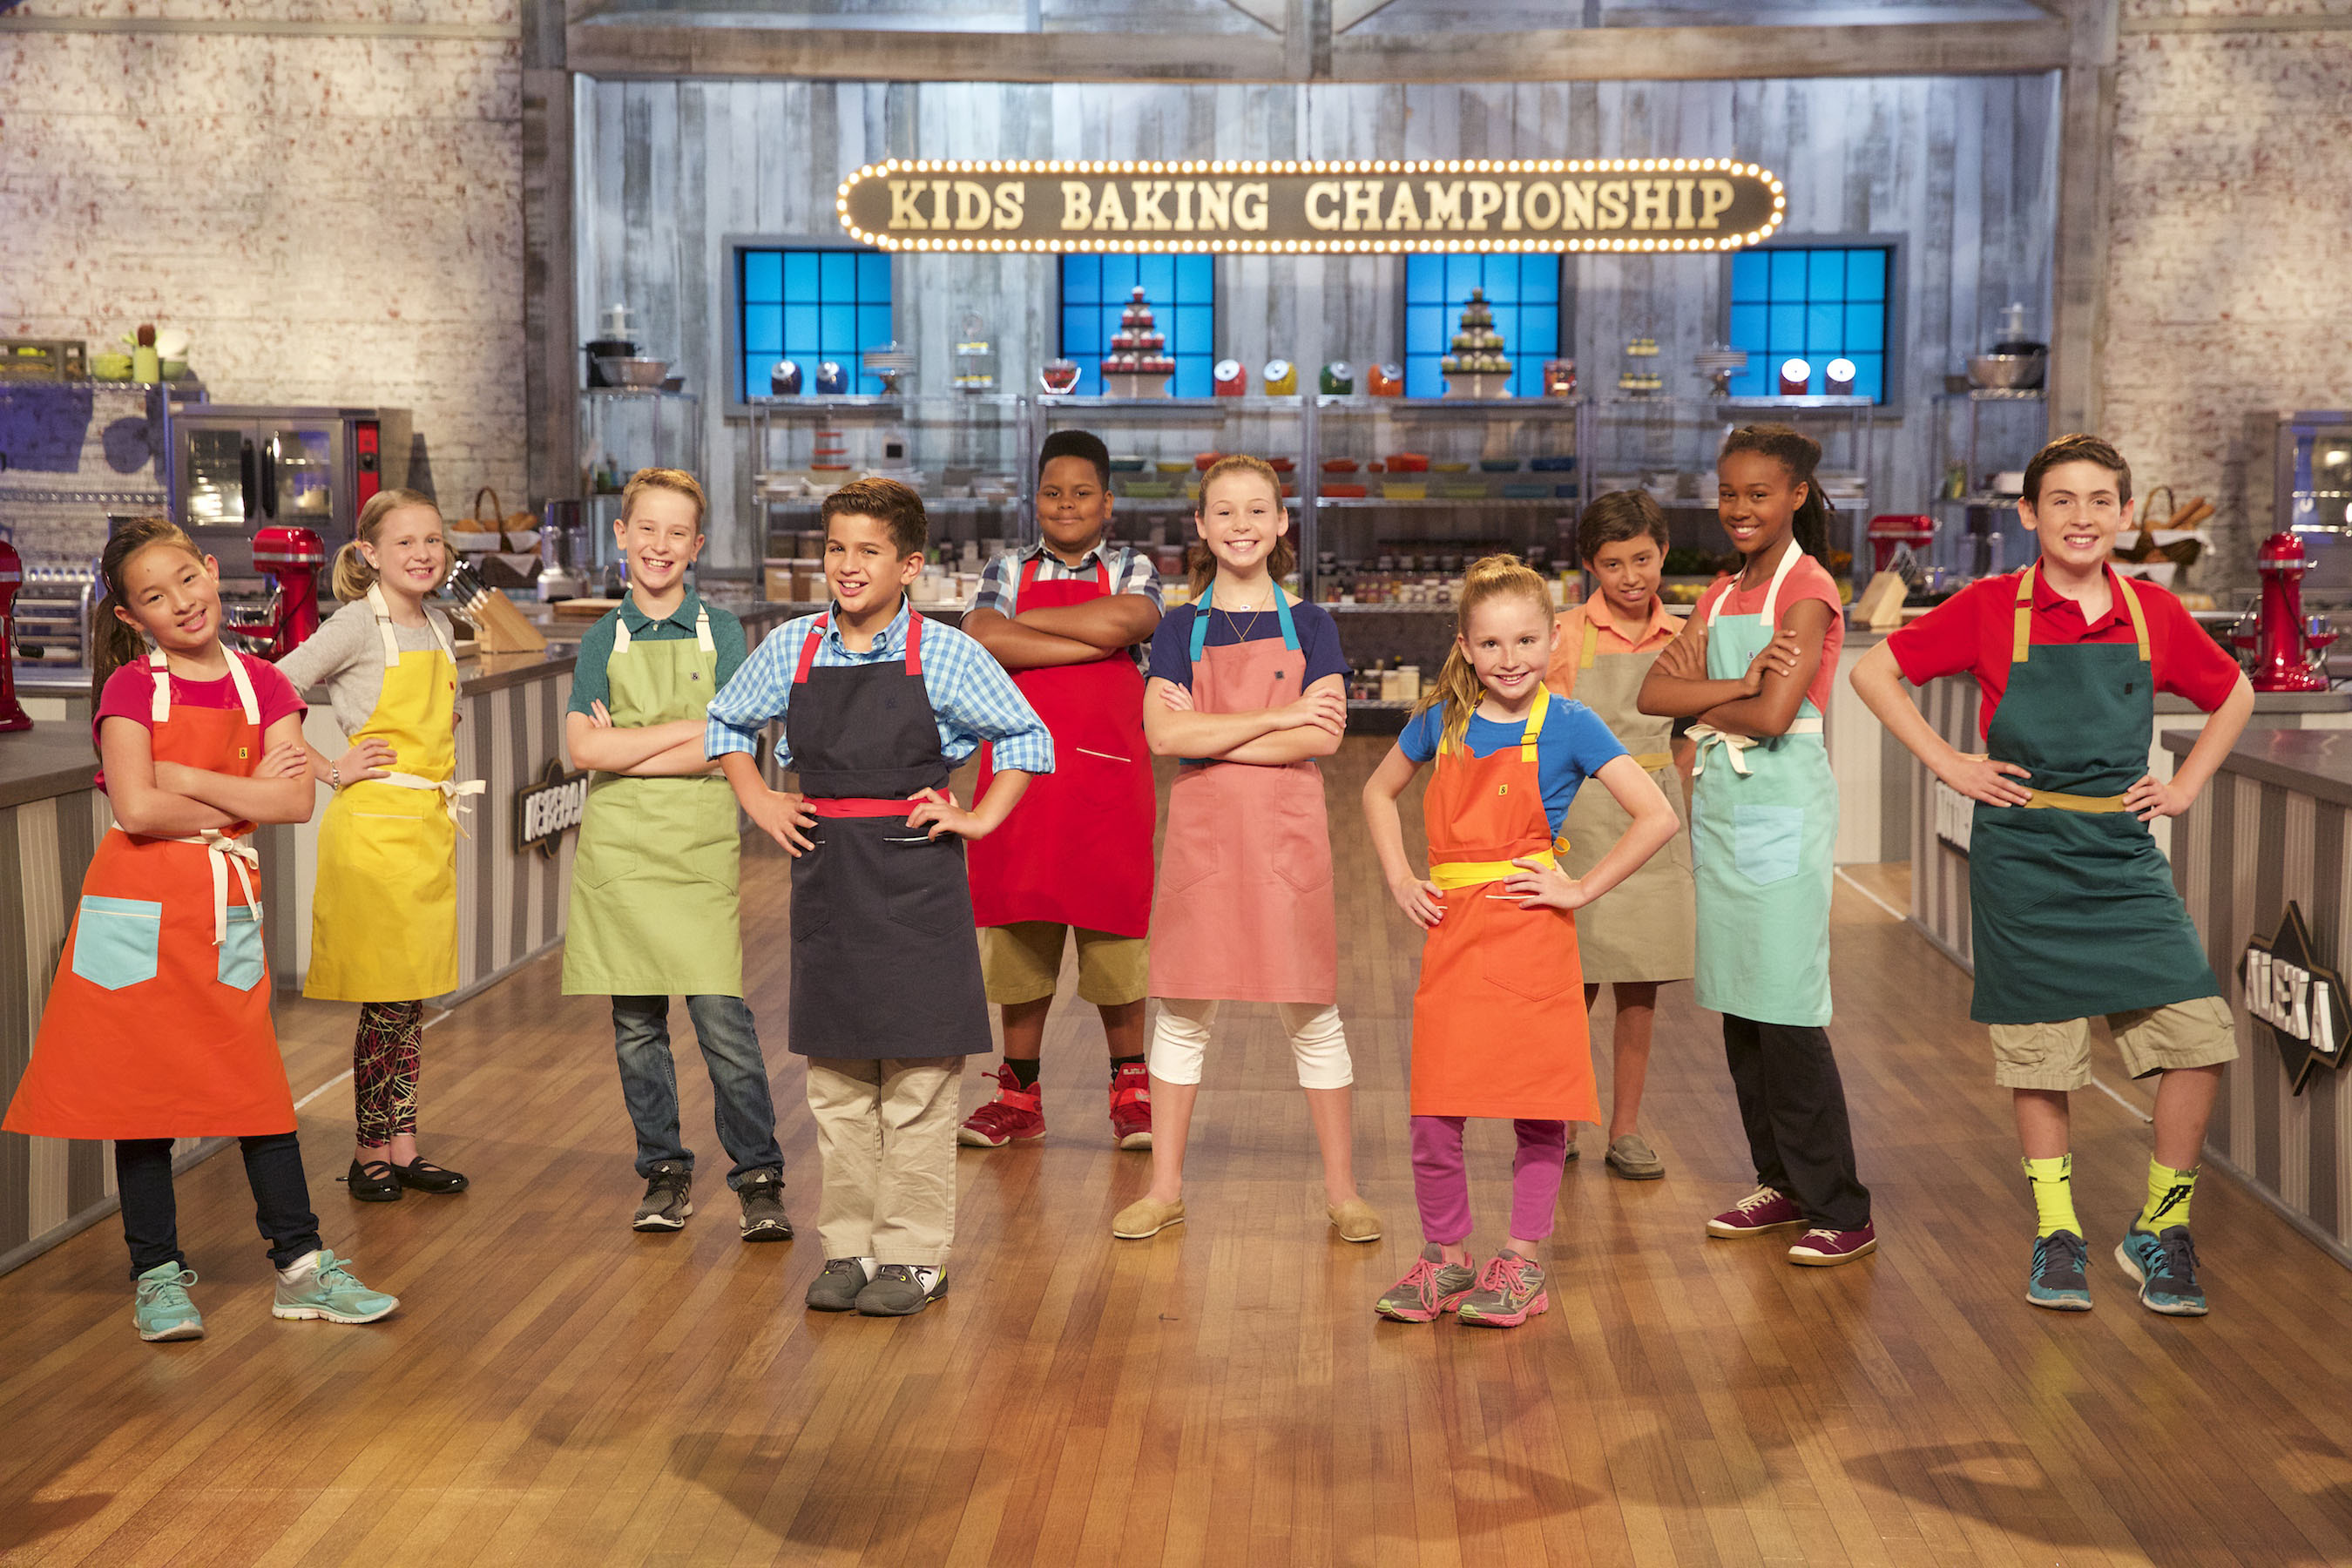 KIDS BAKING CHAMPIONSHIP RETURNS WITH HOSTS VALERIE BERTINELLI AND DUFF